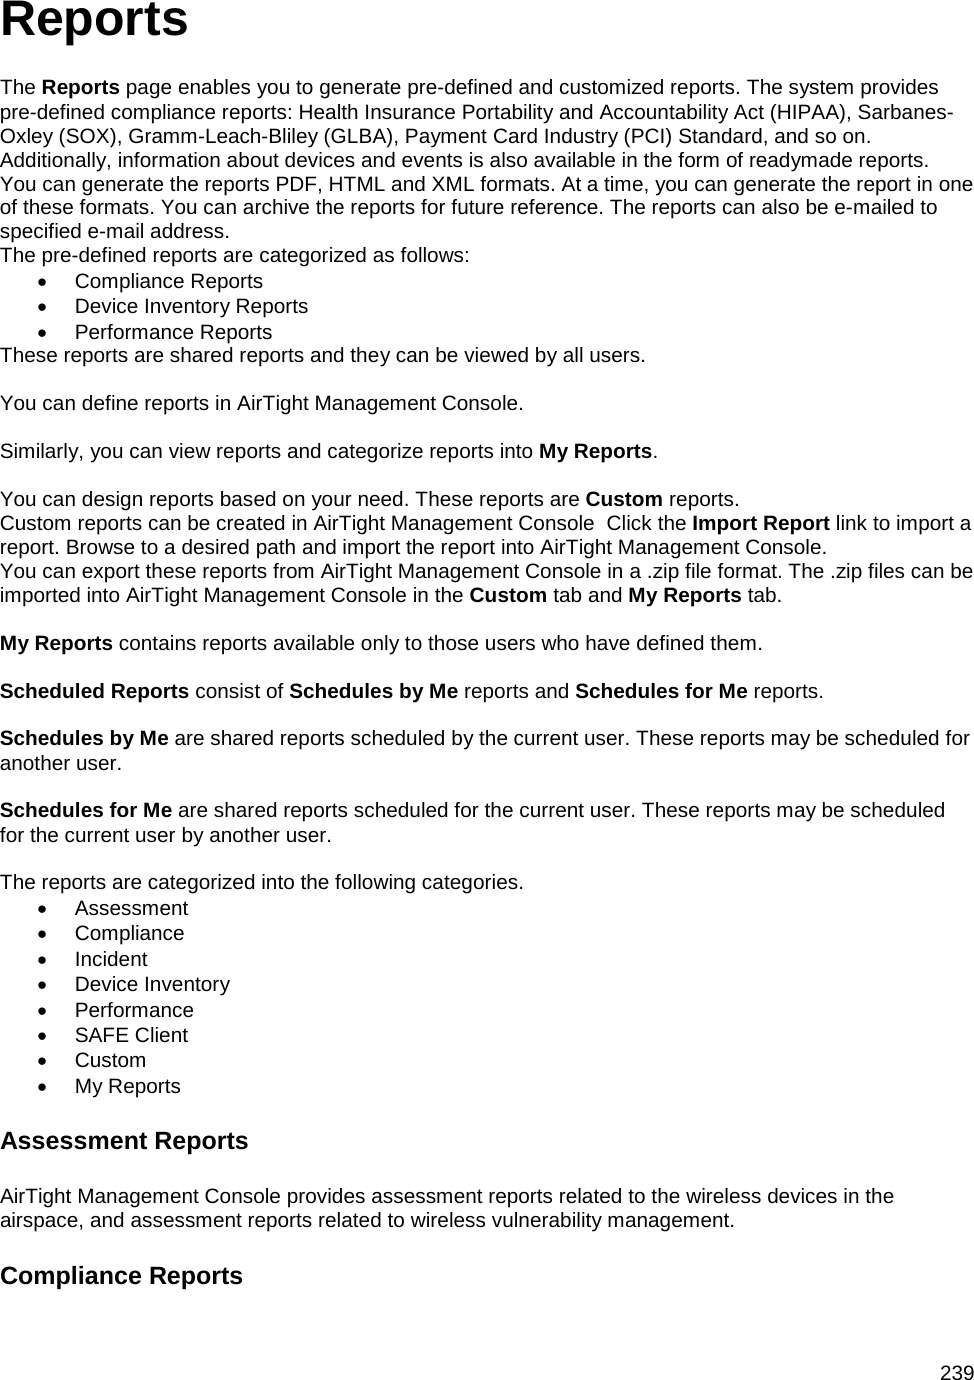  239 Reports The Reports page enables you to generate pre-defined and customized reports. The system provides pre-defined compliance reports: Health Insurance Portability and Accountability Act (HIPAA), Sarbanes-Oxley (SOX), Gramm-Leach-Bliley (GLBA), Payment Card Industry (PCI) Standard, and so on. Additionally, information about devices and events is also available in the form of readymade reports. You can generate the reports PDF, HTML and XML formats. At a time, you can generate the report in one of these formats. You can archive the reports for future reference. The reports can also be e-mailed to specified e-mail address. The pre-defined reports are categorized as follows: • Compliance Reports • Device Inventory Reports • Performance Reports These reports are shared reports and they can be viewed by all users.   You can define reports in AirTight Management Console.   Similarly, you can view reports and categorize reports into My Reports.   You can design reports based on your need. These reports are Custom reports. Custom reports can be created in AirTight Management Console  Click the Import Report link to import a report. Browse to a desired path and import the report into AirTight Management Console. You can export these reports from AirTight Management Console in a .zip file format. The .zip files can be imported into AirTight Management Console in the Custom tab and My Reports tab.   My Reports contains reports available only to those users who have defined them.   Scheduled Reports consist of Schedules by Me reports and Schedules for Me reports.   Schedules by Me are shared reports scheduled by the current user. These reports may be scheduled for another user.   Schedules for Me are shared reports scheduled for the current user. These reports may be scheduled for the current user by another user.   The reports are categorized into the following categories. • Assessment • Compliance • Incident • Device Inventory • Performance • SAFE Client • Custom • My Reports Assessment Reports AirTight Management Console provides assessment reports related to the wireless devices in the airspace, and assessment reports related to wireless vulnerability management. Compliance Reports 